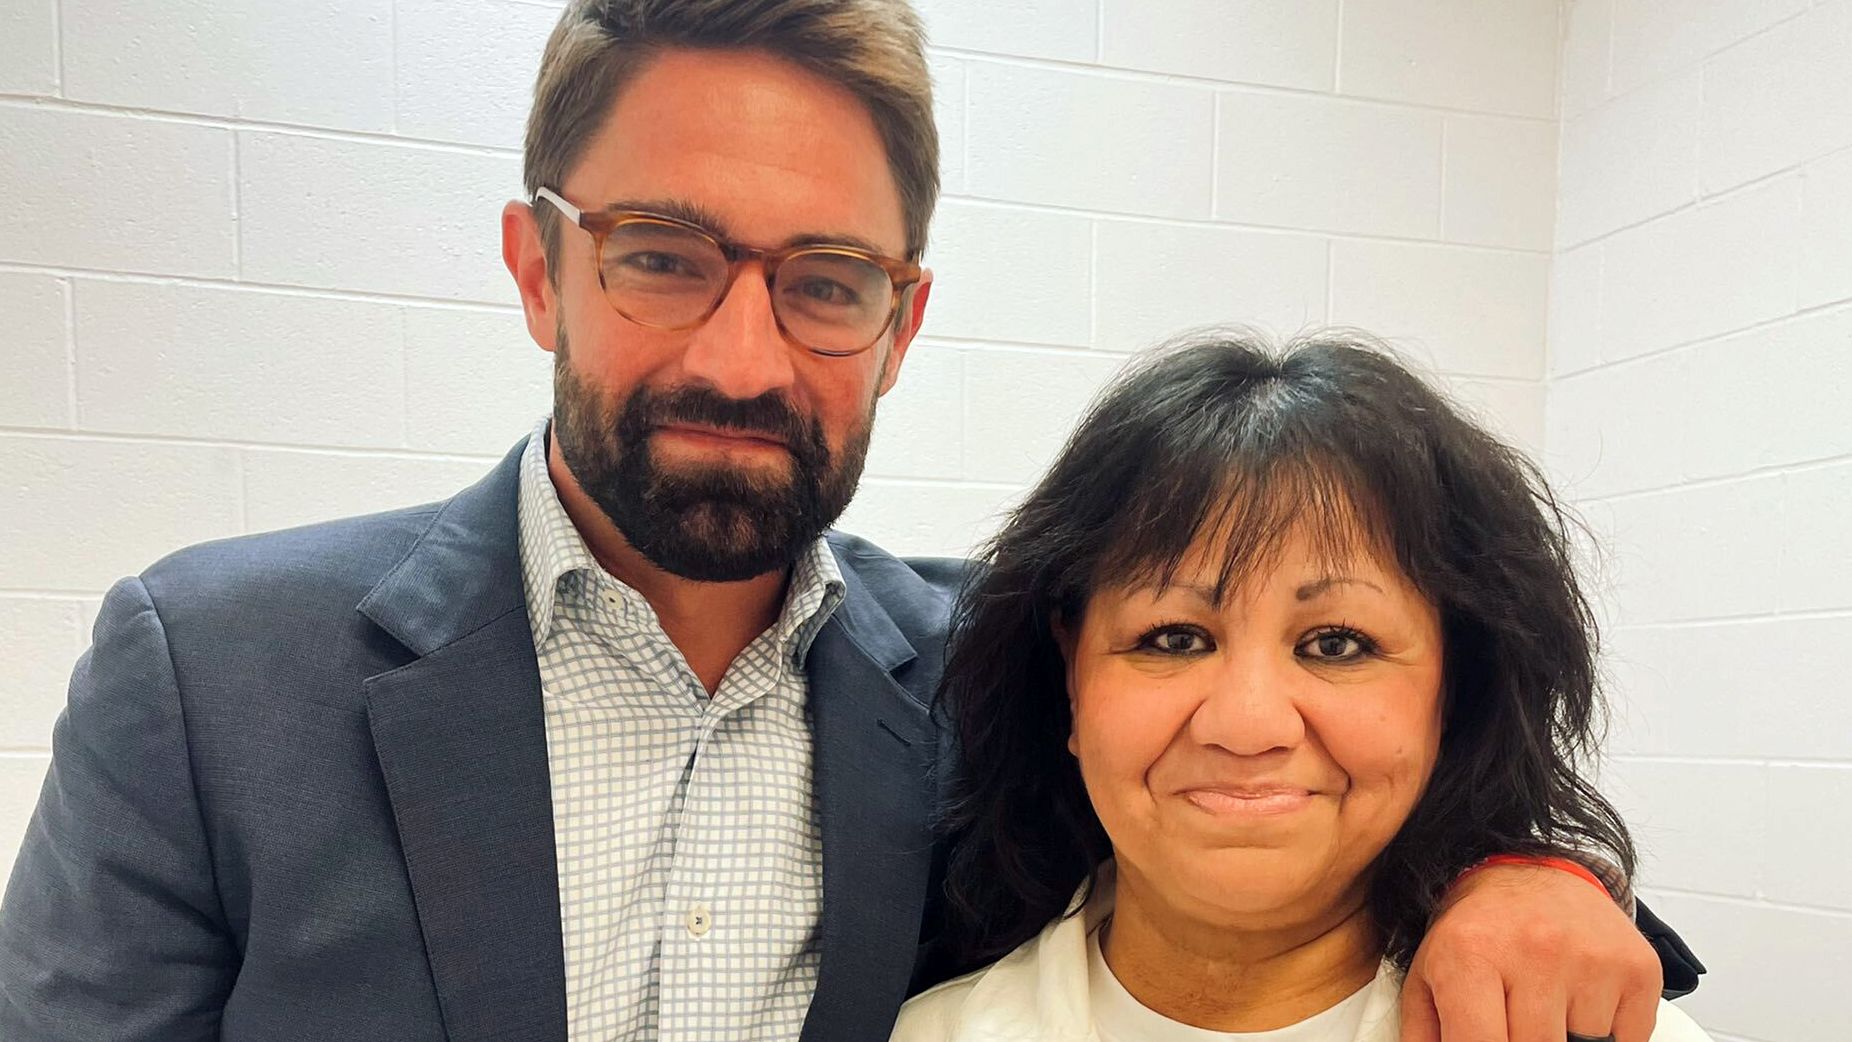 Texas state Rep. Jeff Leach stands next to death row inmate Melissa Lucio during a visit Wednesday by a group of seven lawmakers to the Mountain View Unit in Gatesville, Texas.